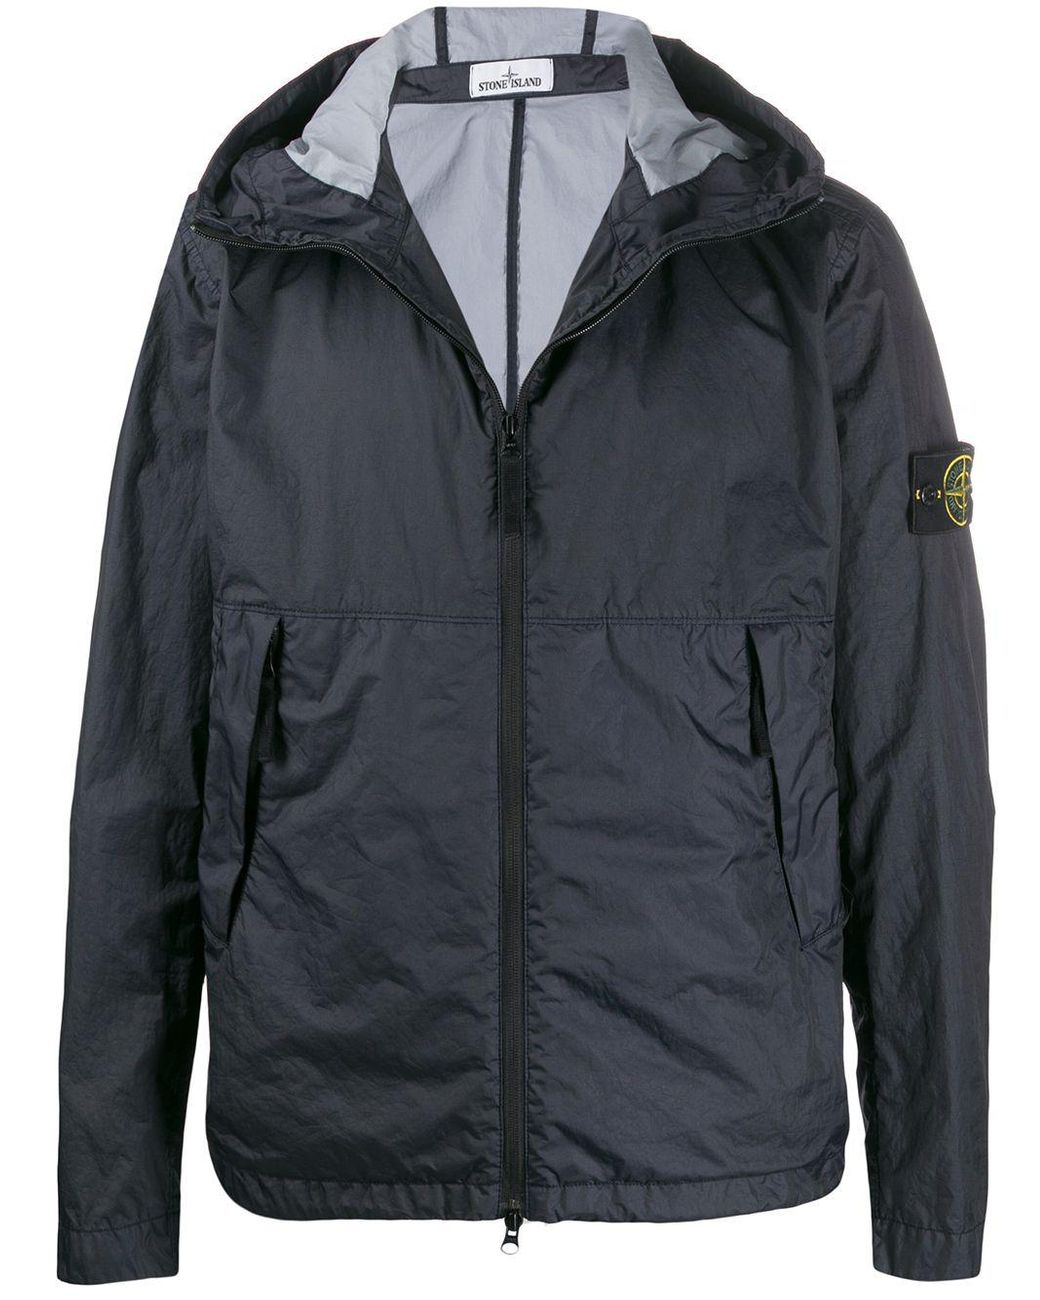 Stone Island Synthetic Hooded Lightweight Jacket in Blue for Men - Lyst